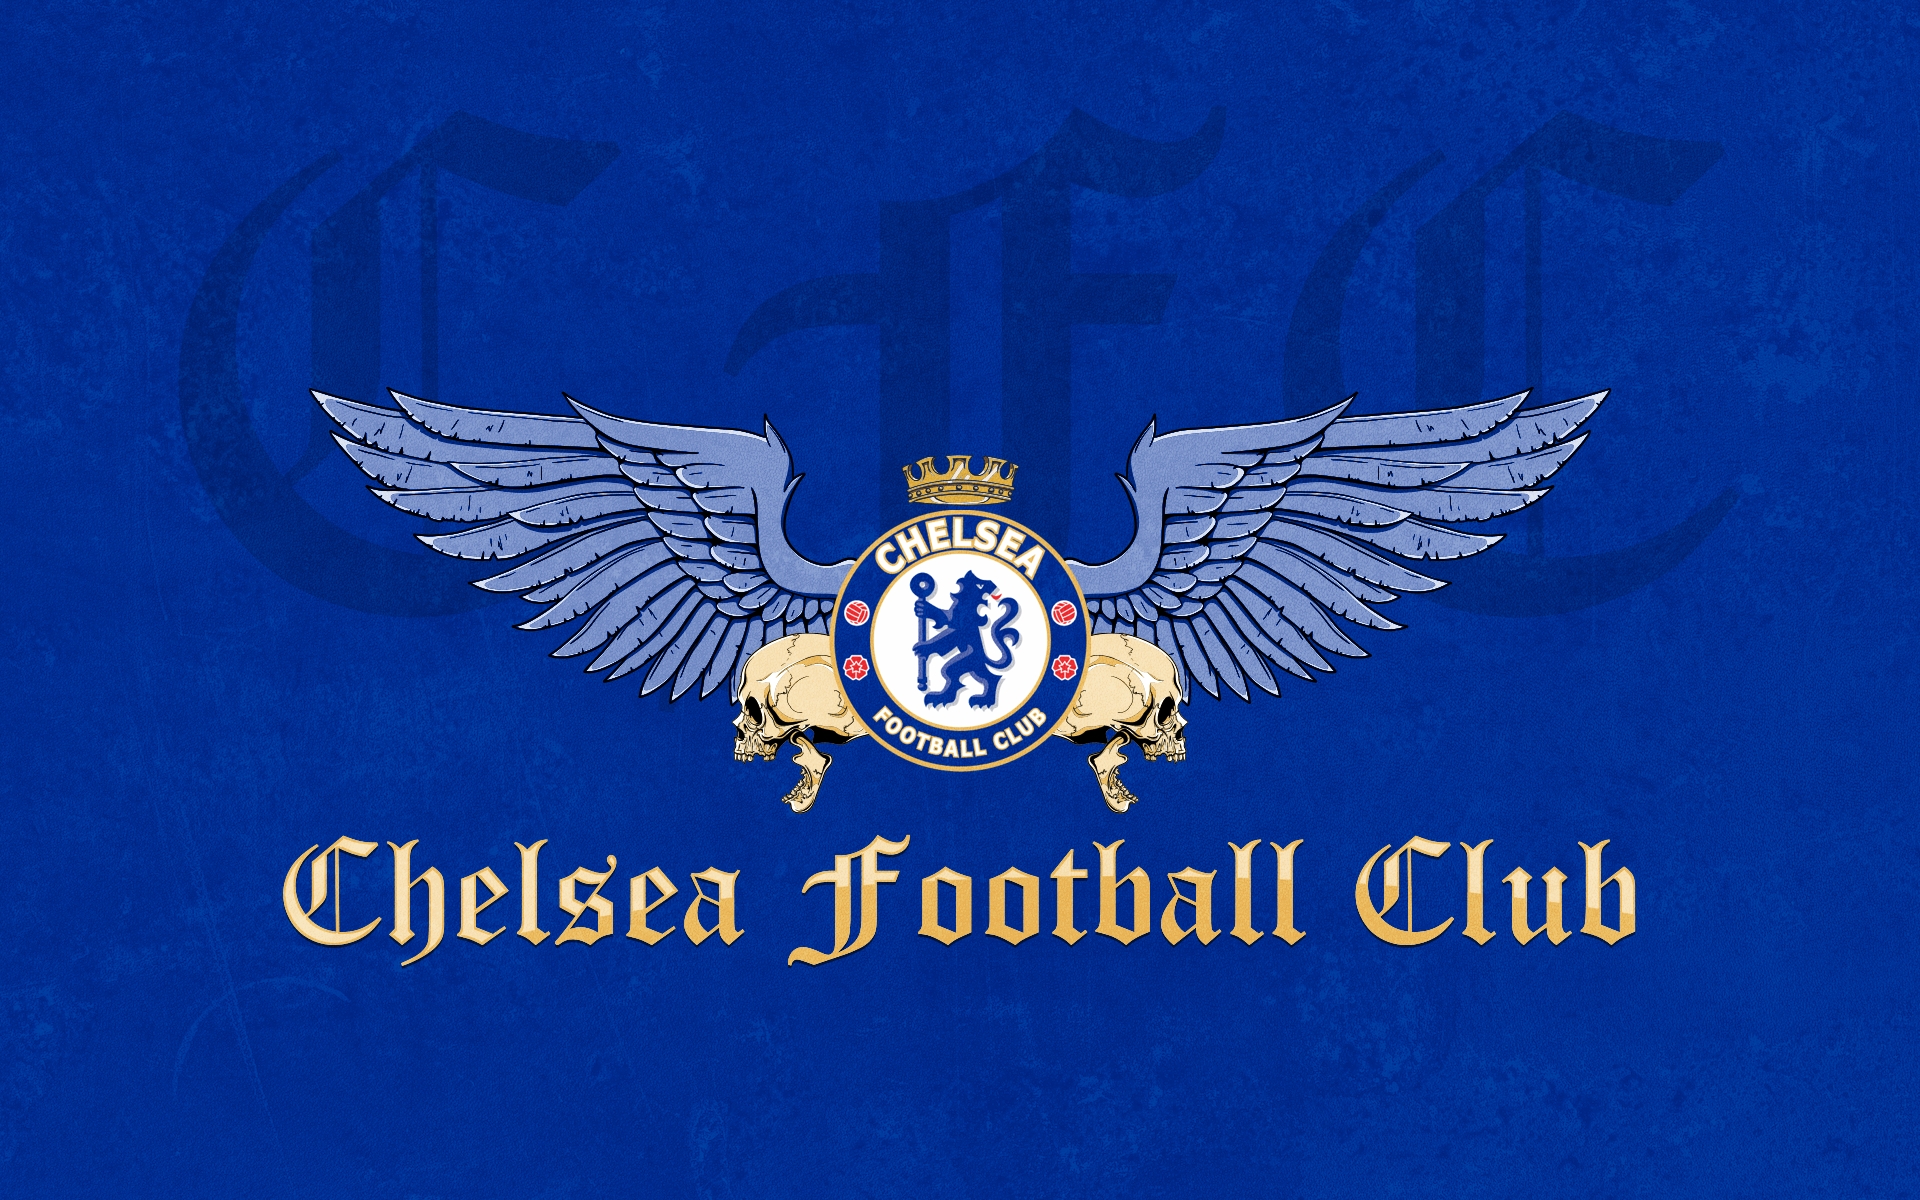 Football Club Chelsea Fc Wallpaper Logo With